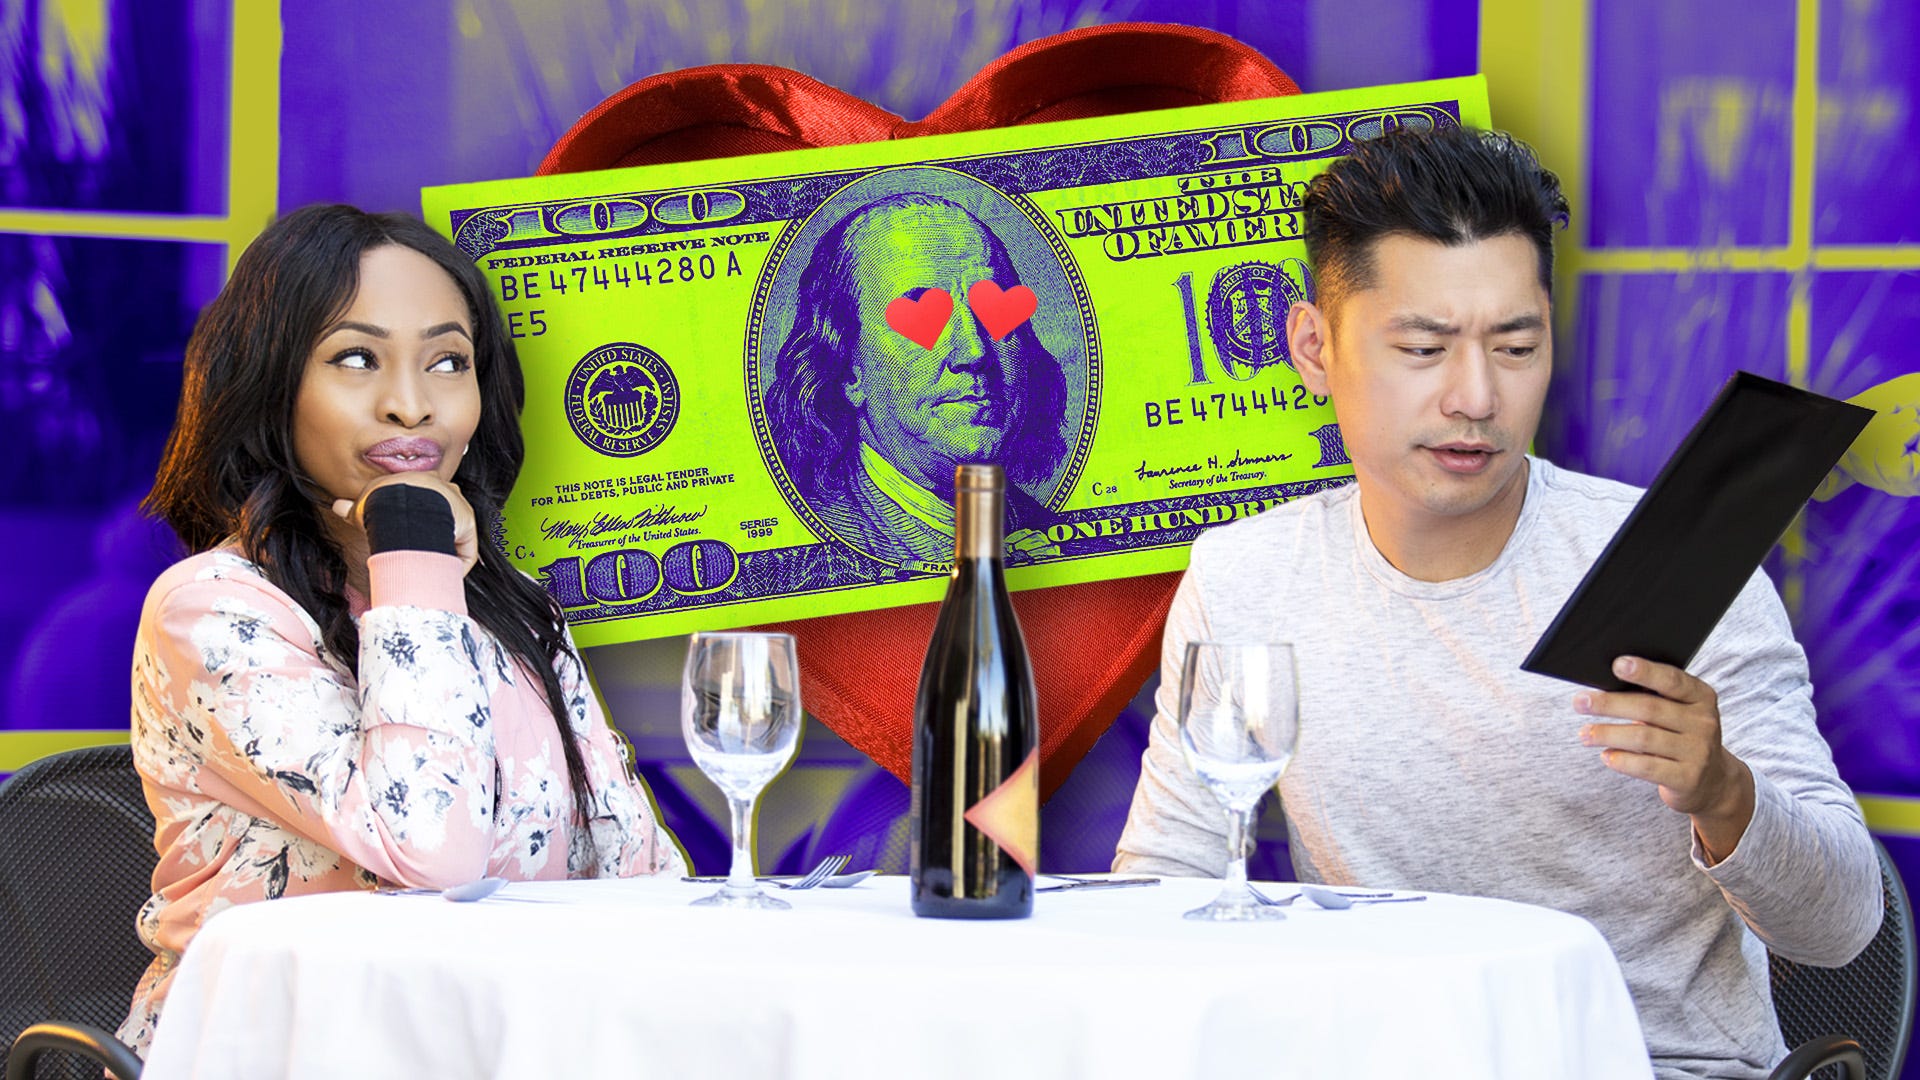 Dating Someone New? Here's How to Talk About Money (and Why You Should)